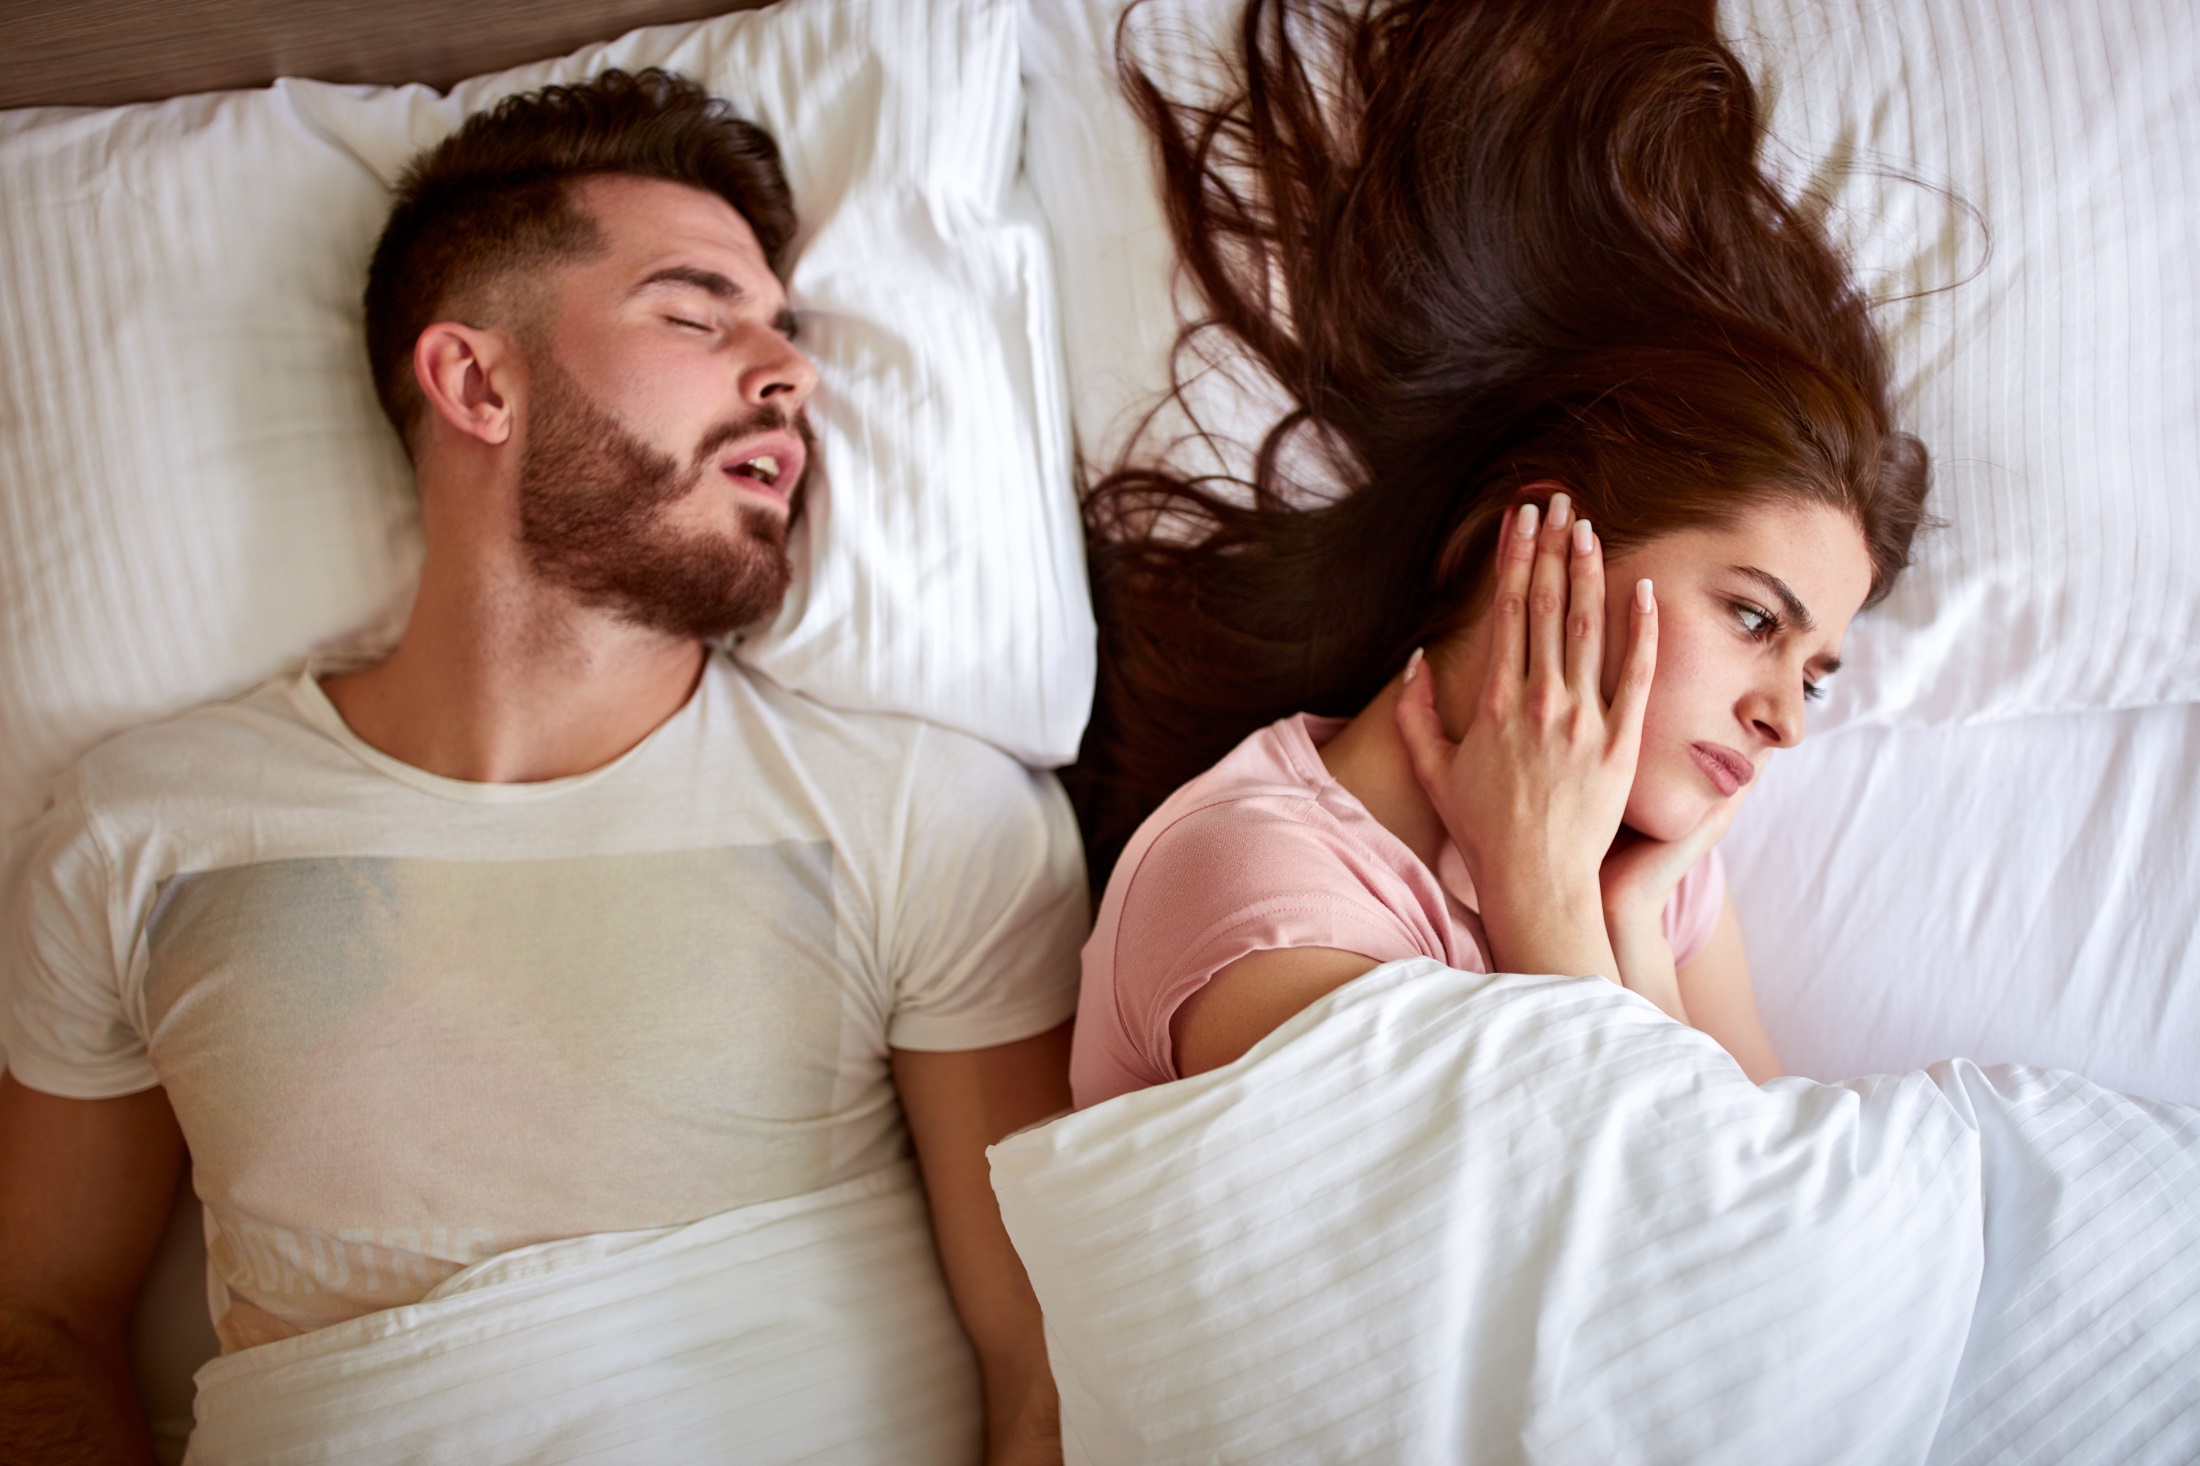 Can snoring be dangerous? Learn about its causes and treatment